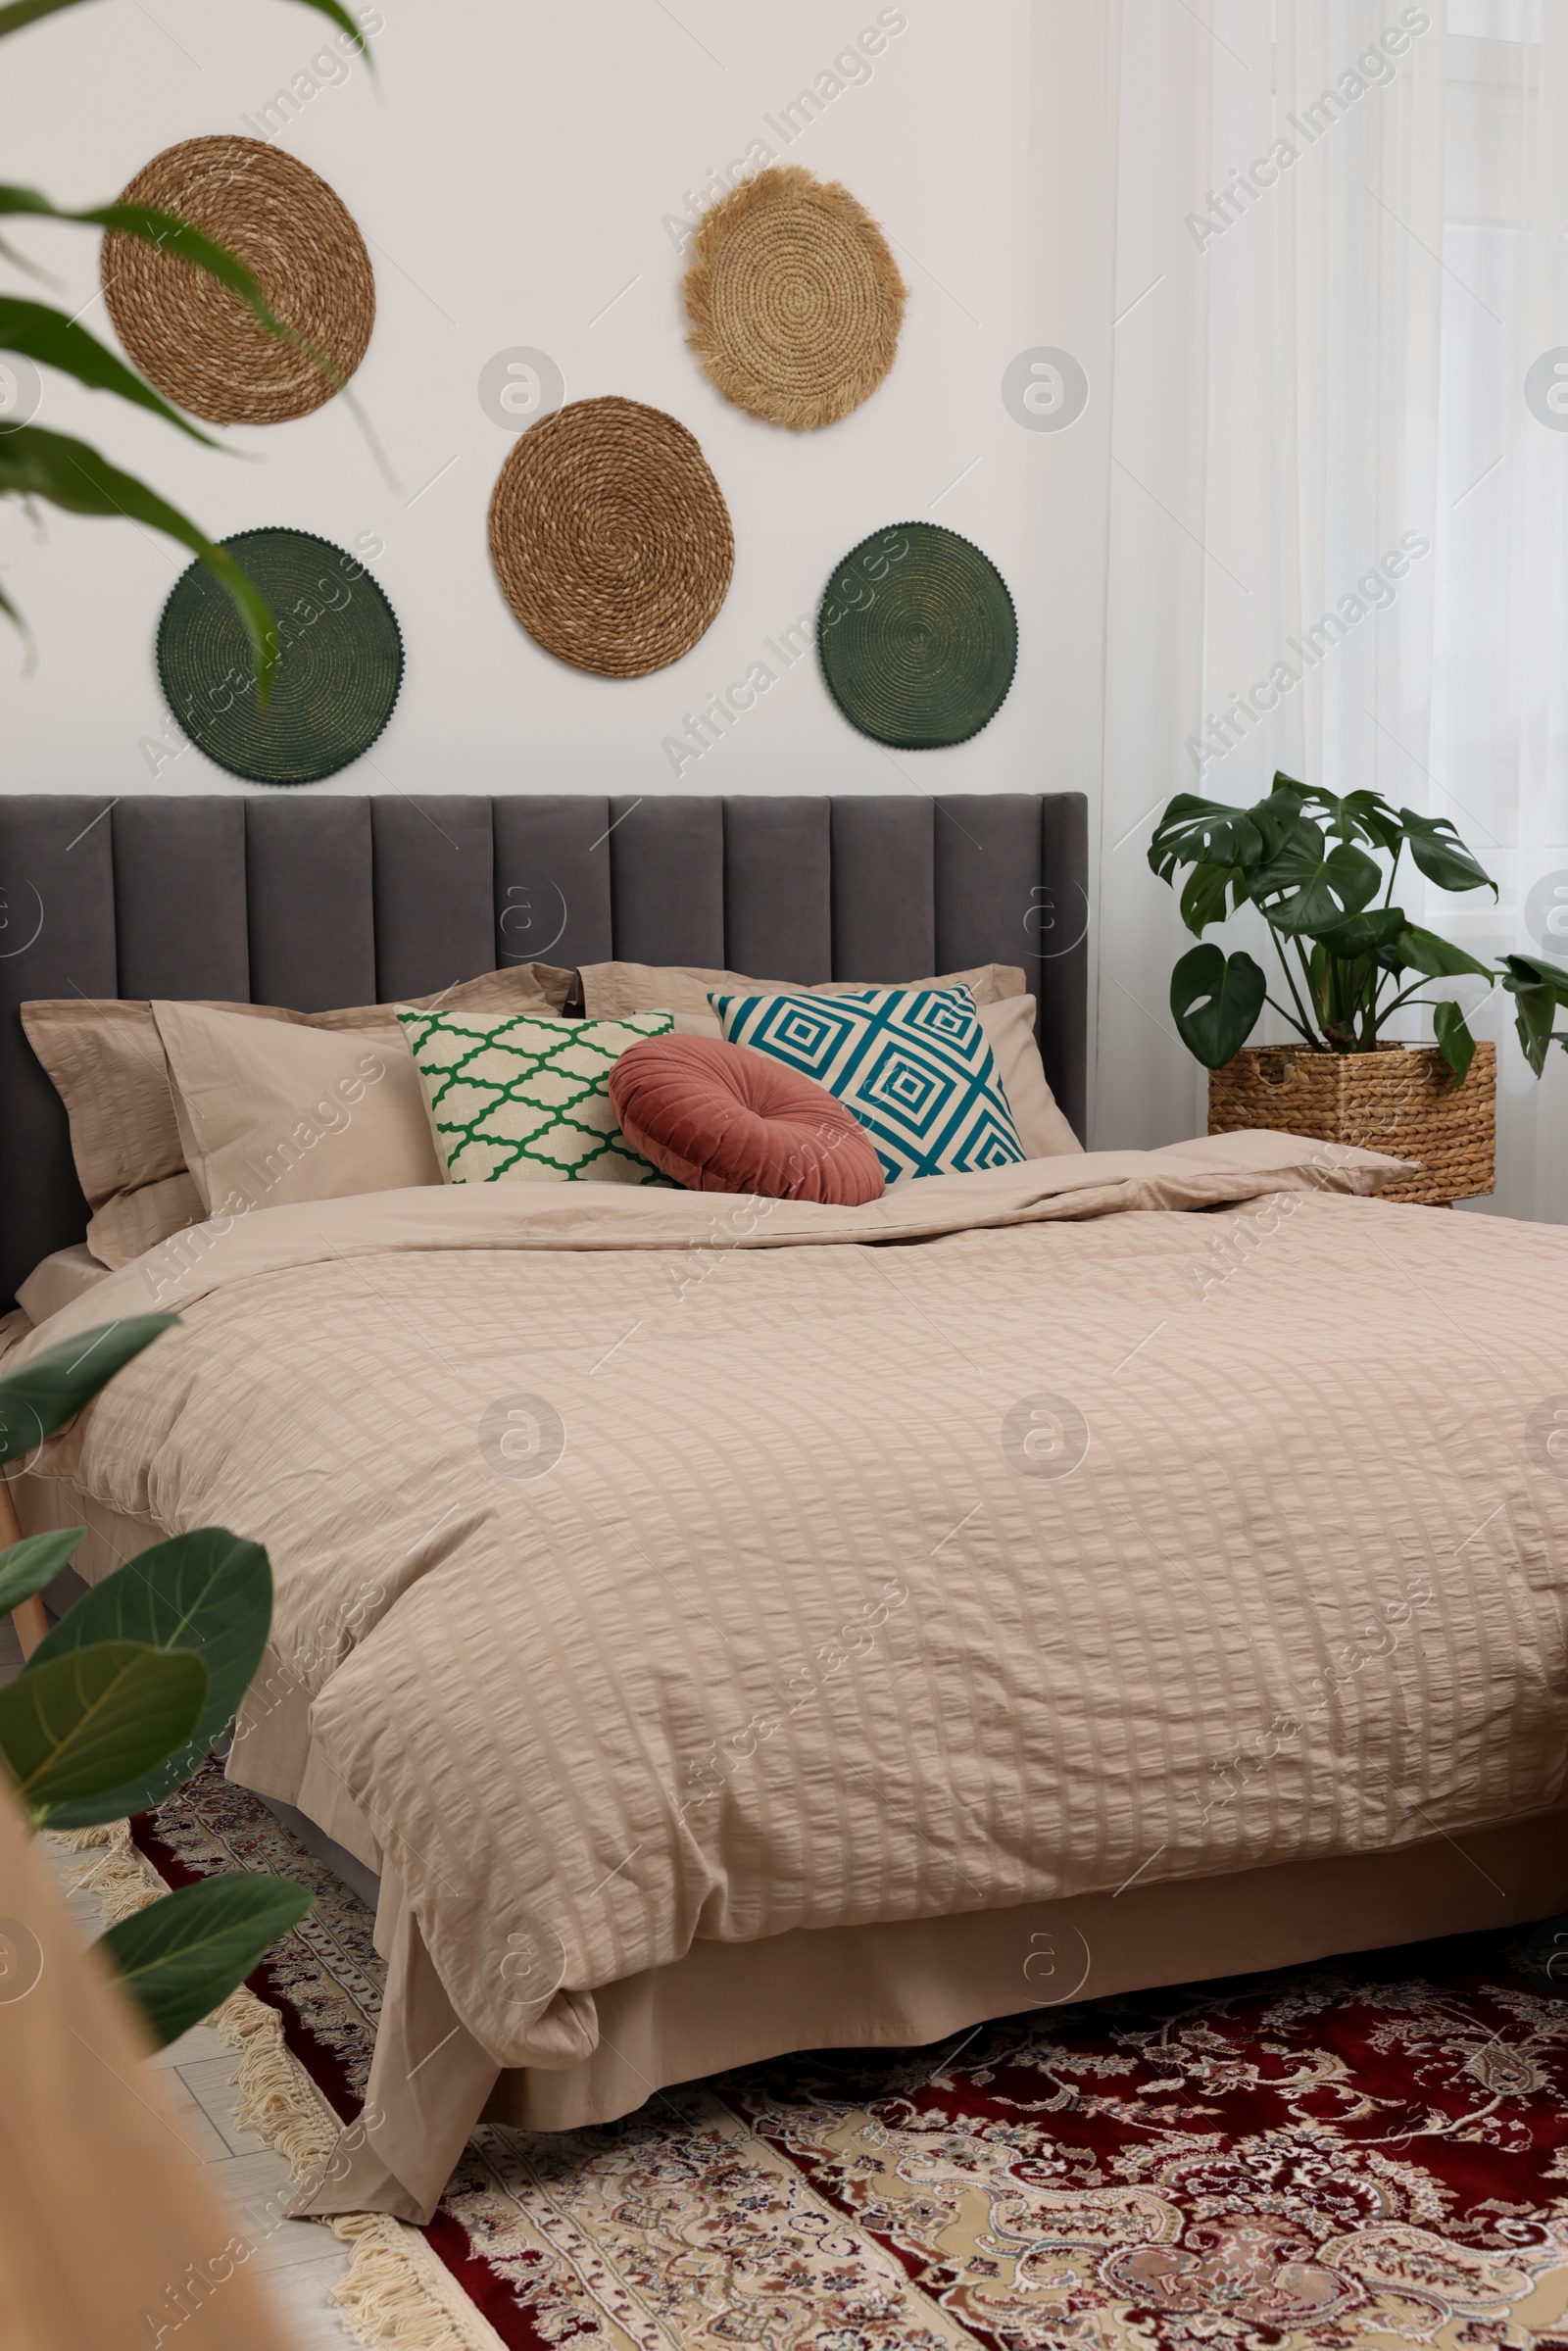 Photo of Large comfortable bed and potted houseplants in stylish bedroom. Interior design